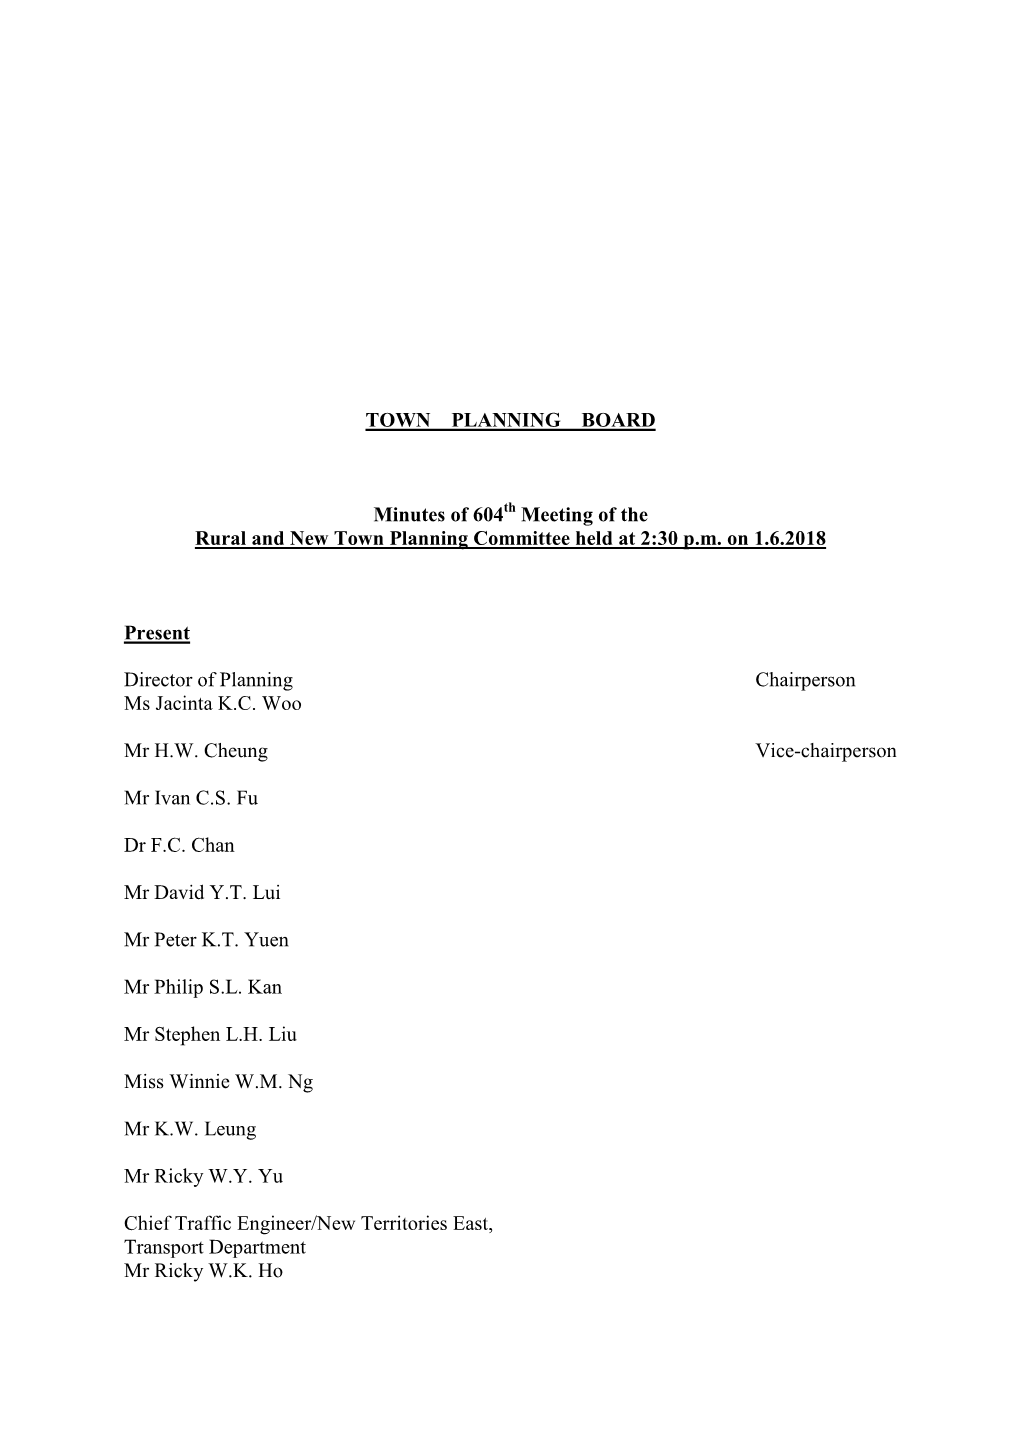 TOWN PLANNING BOARD Minutes of 604 Meeting of the Rural and New